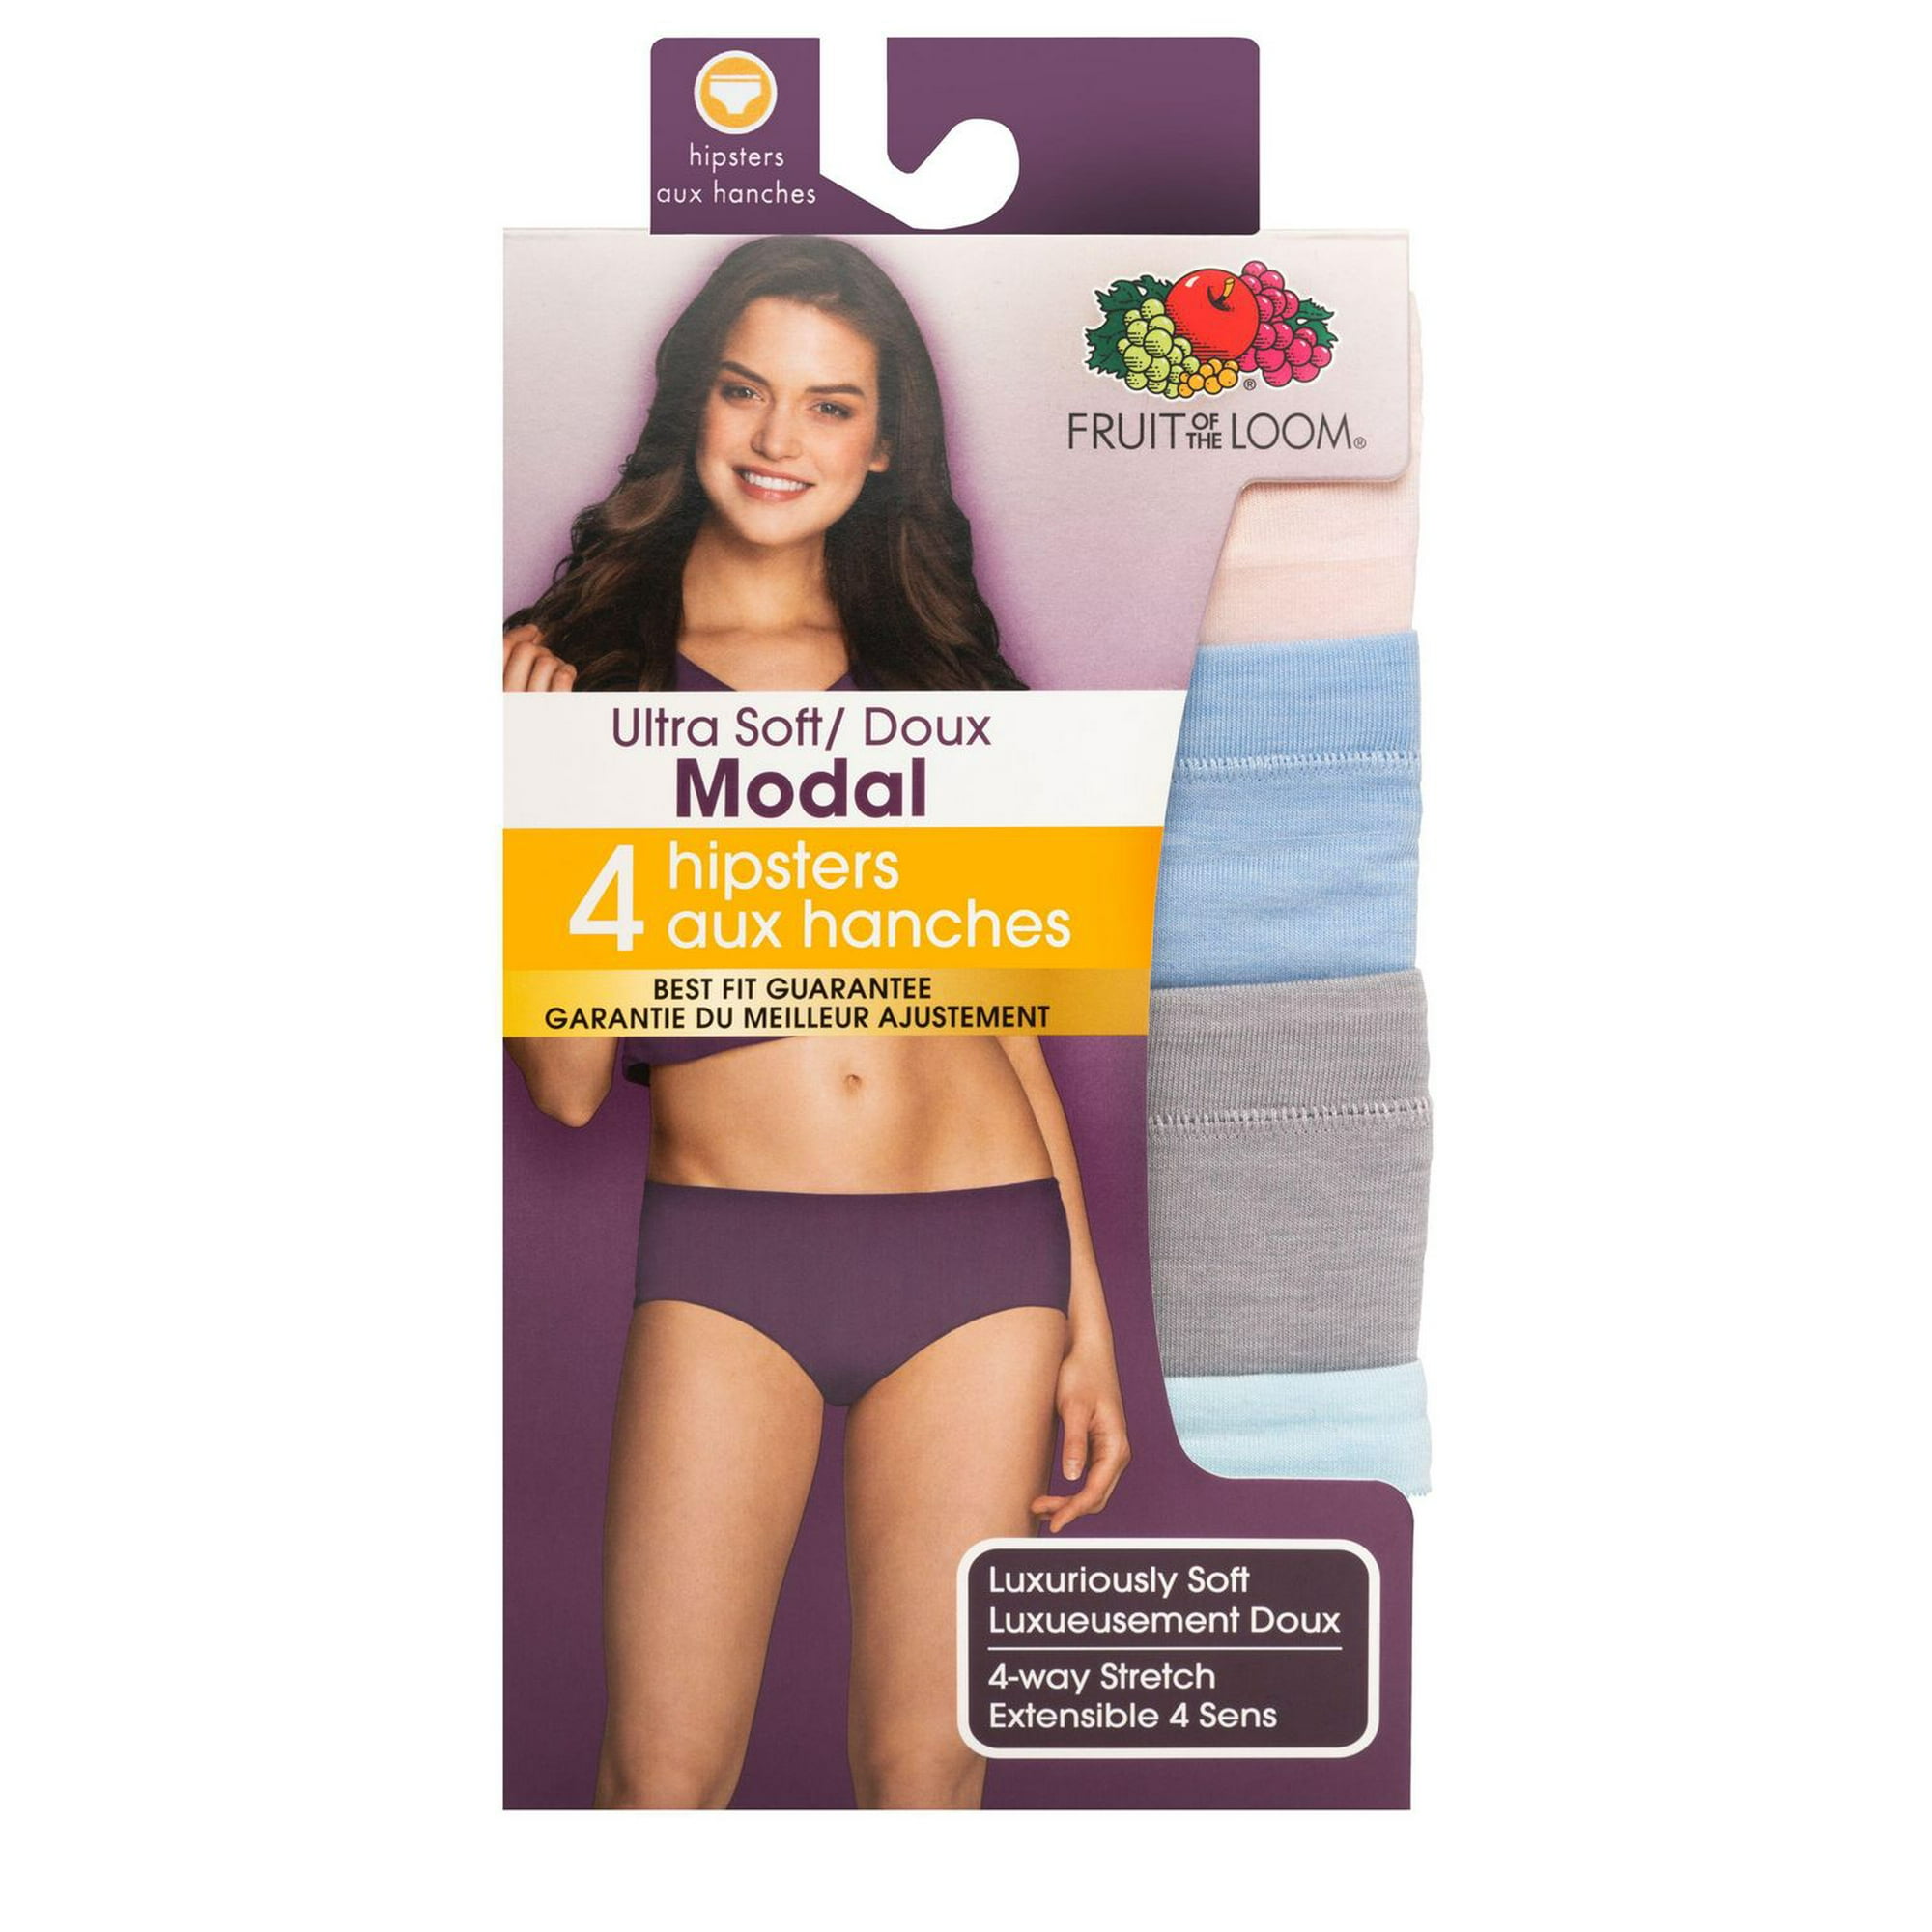 Fruit of the Loom Women's Hipster Panties (Pack of 5), assorted